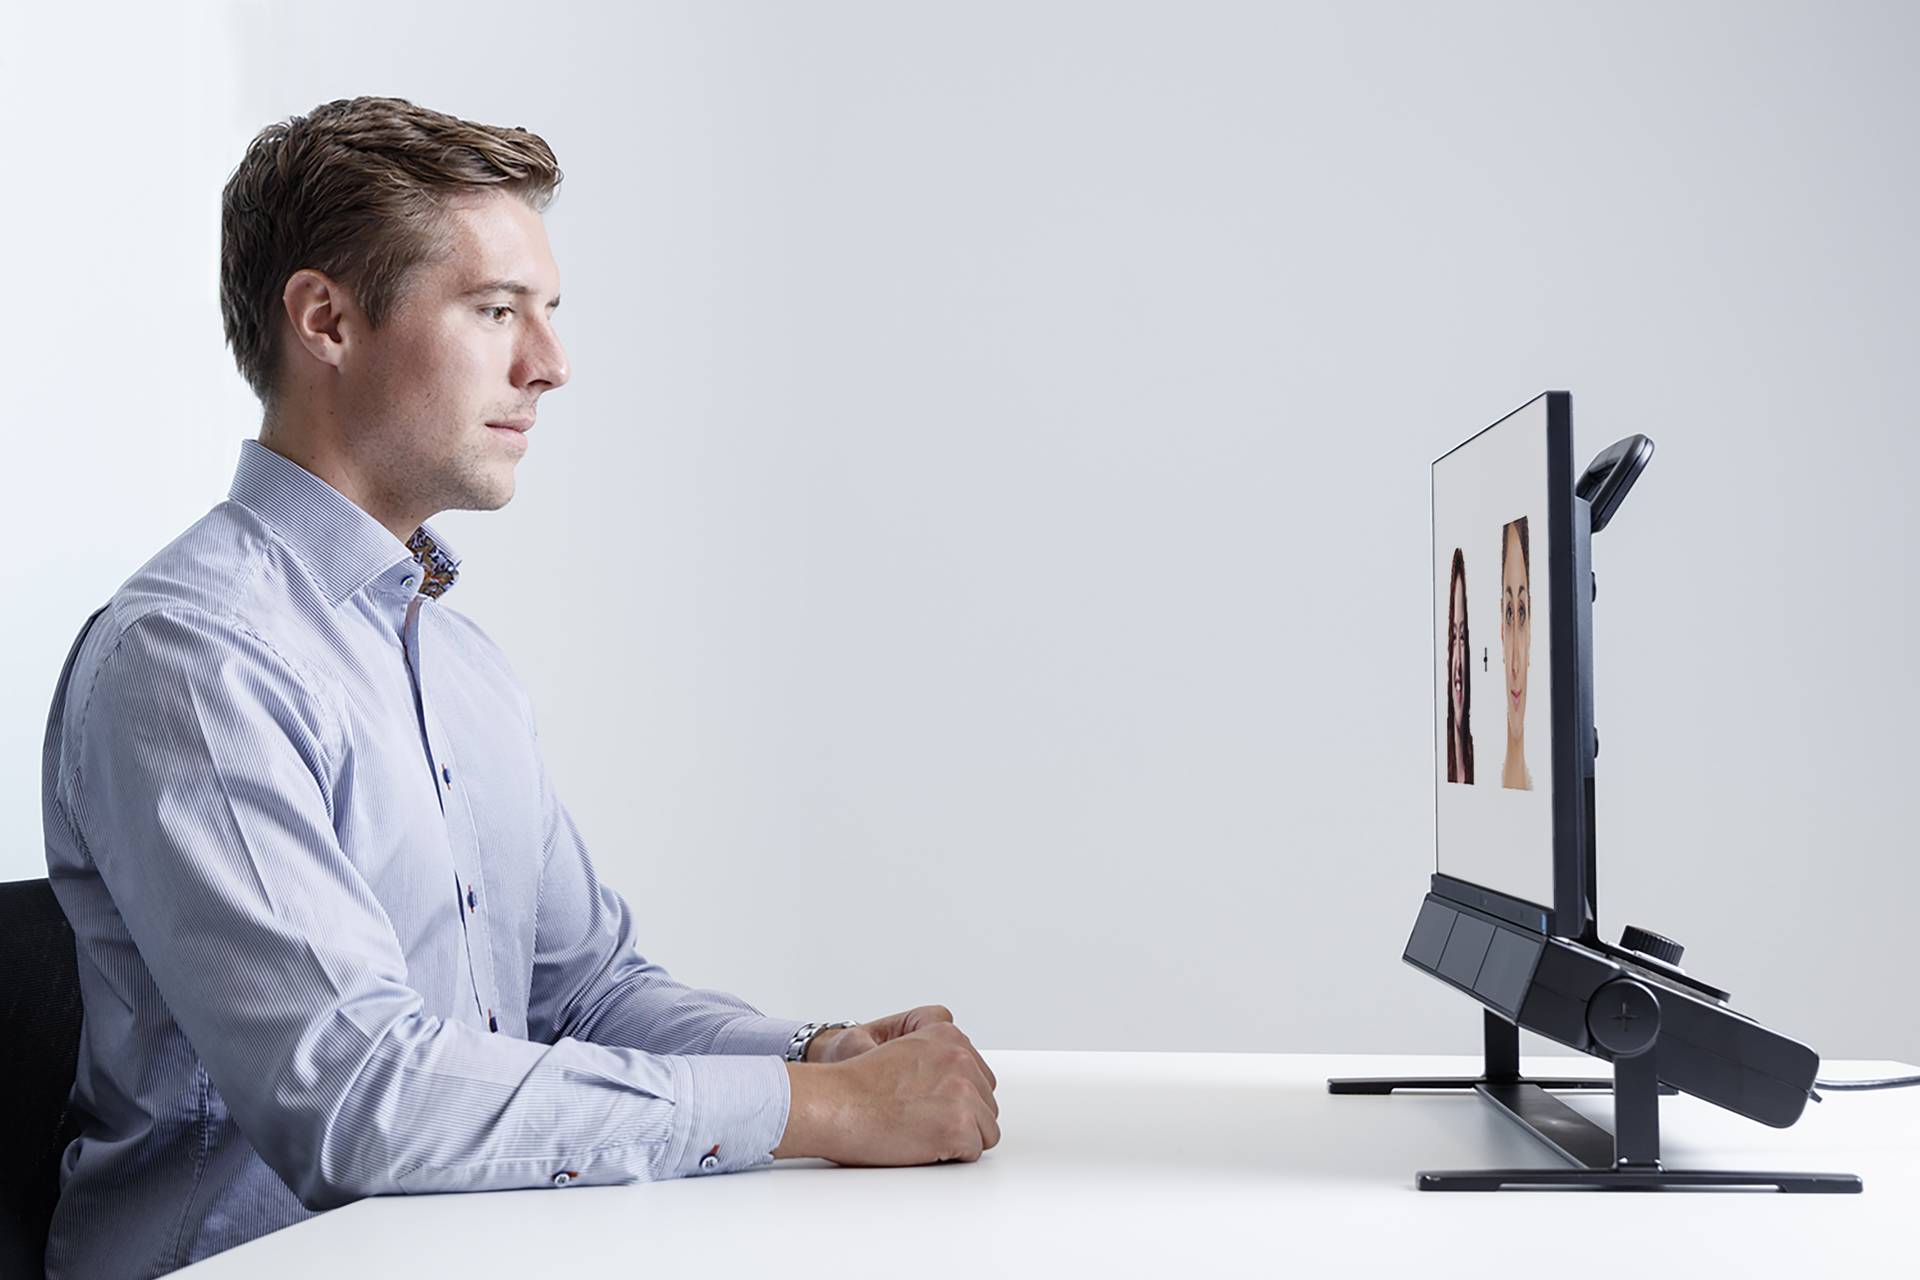 Tobii Eye Tracker 5L powers AI-based workplace solutions - Tobii AB